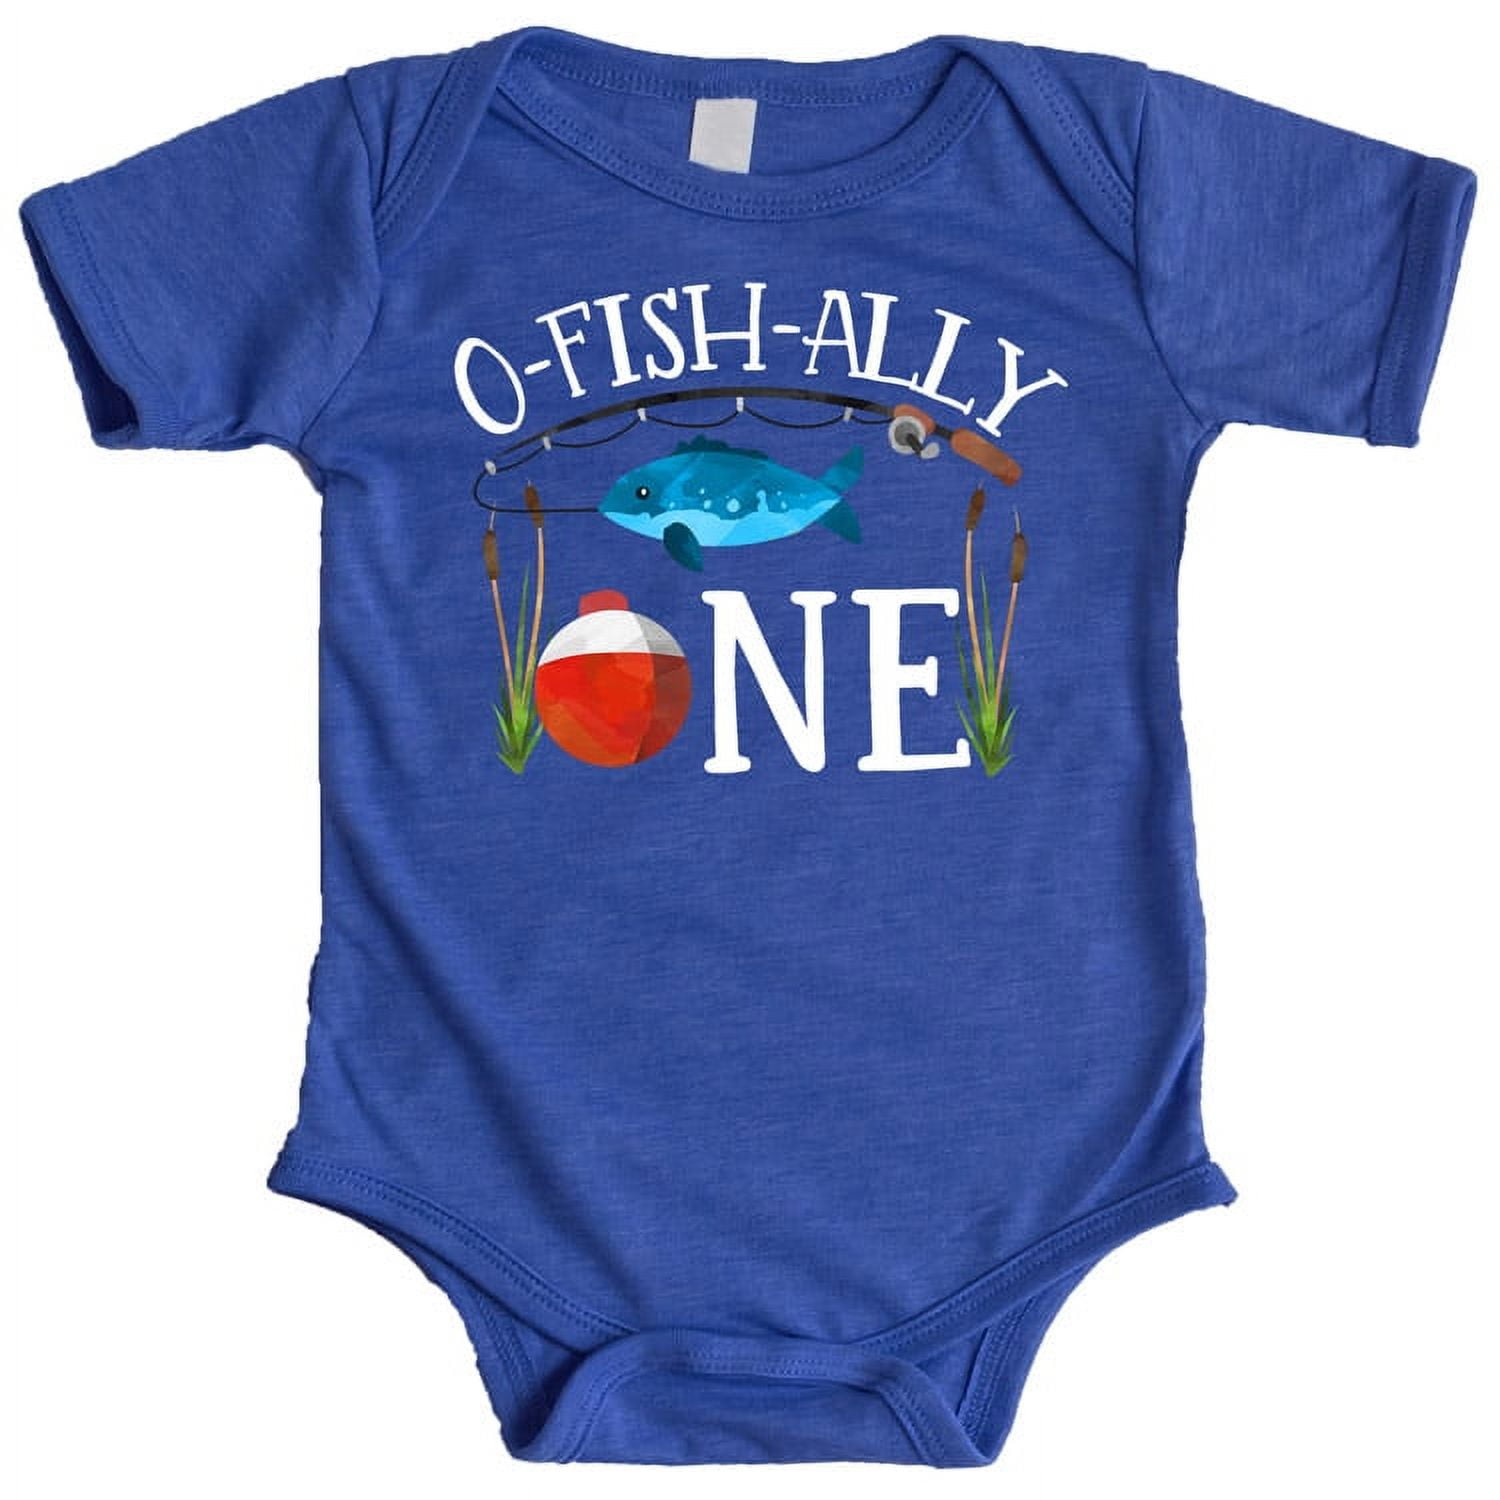 O-Fish-Ally- ONE Boys 1st Birthday Bodysuit for Baby Boys Fishing First Birthday  Outfit Vintage Royal Bodysuit 12 Months 